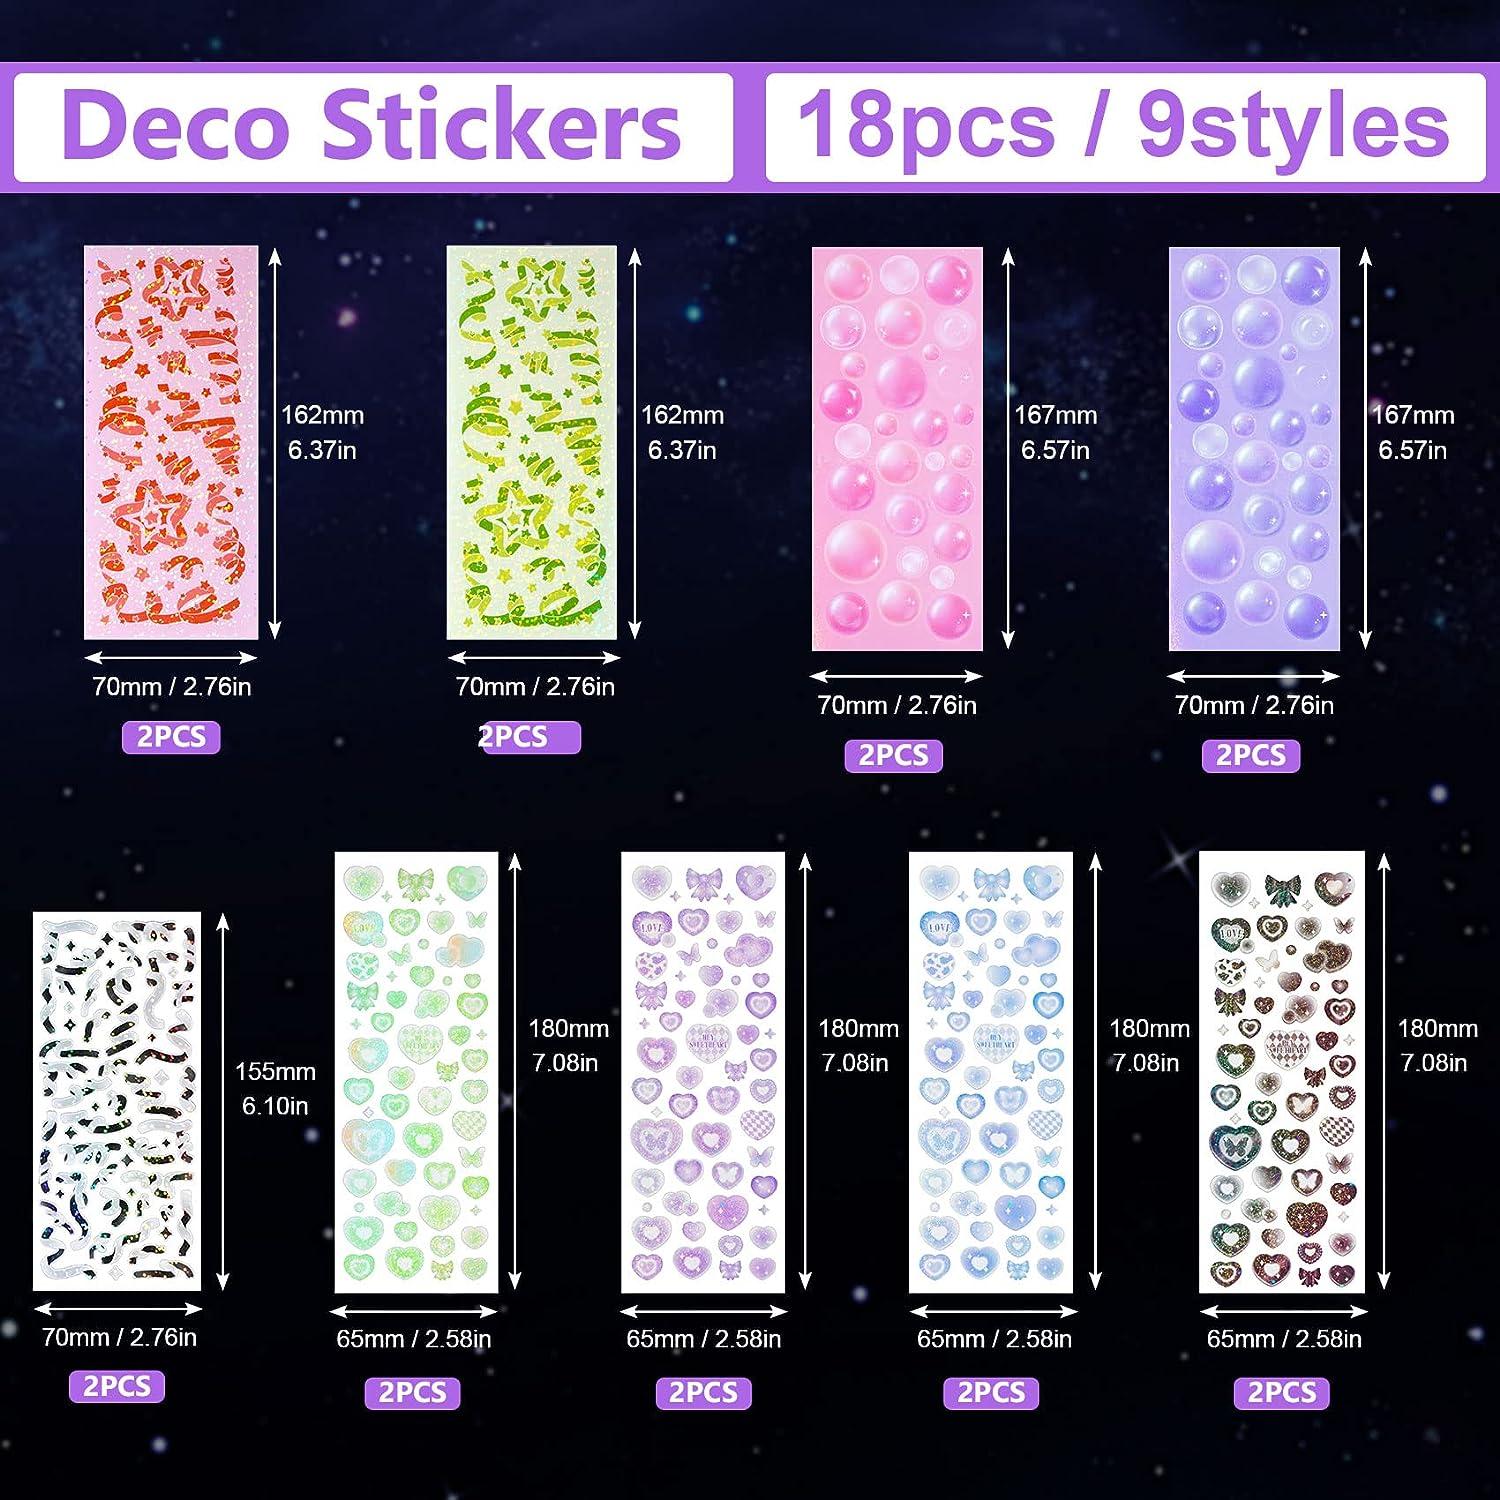 HINZIC 18 Sheets Kpop Photocard Korean Stickers Set Colorful Glitter Self  Adhesive Deco Stickers Ribbon Sweetheart Butterfly Bubble Cute Korean Deco  Stickers for Scrapbook DIY Decor Arts Card Crafts